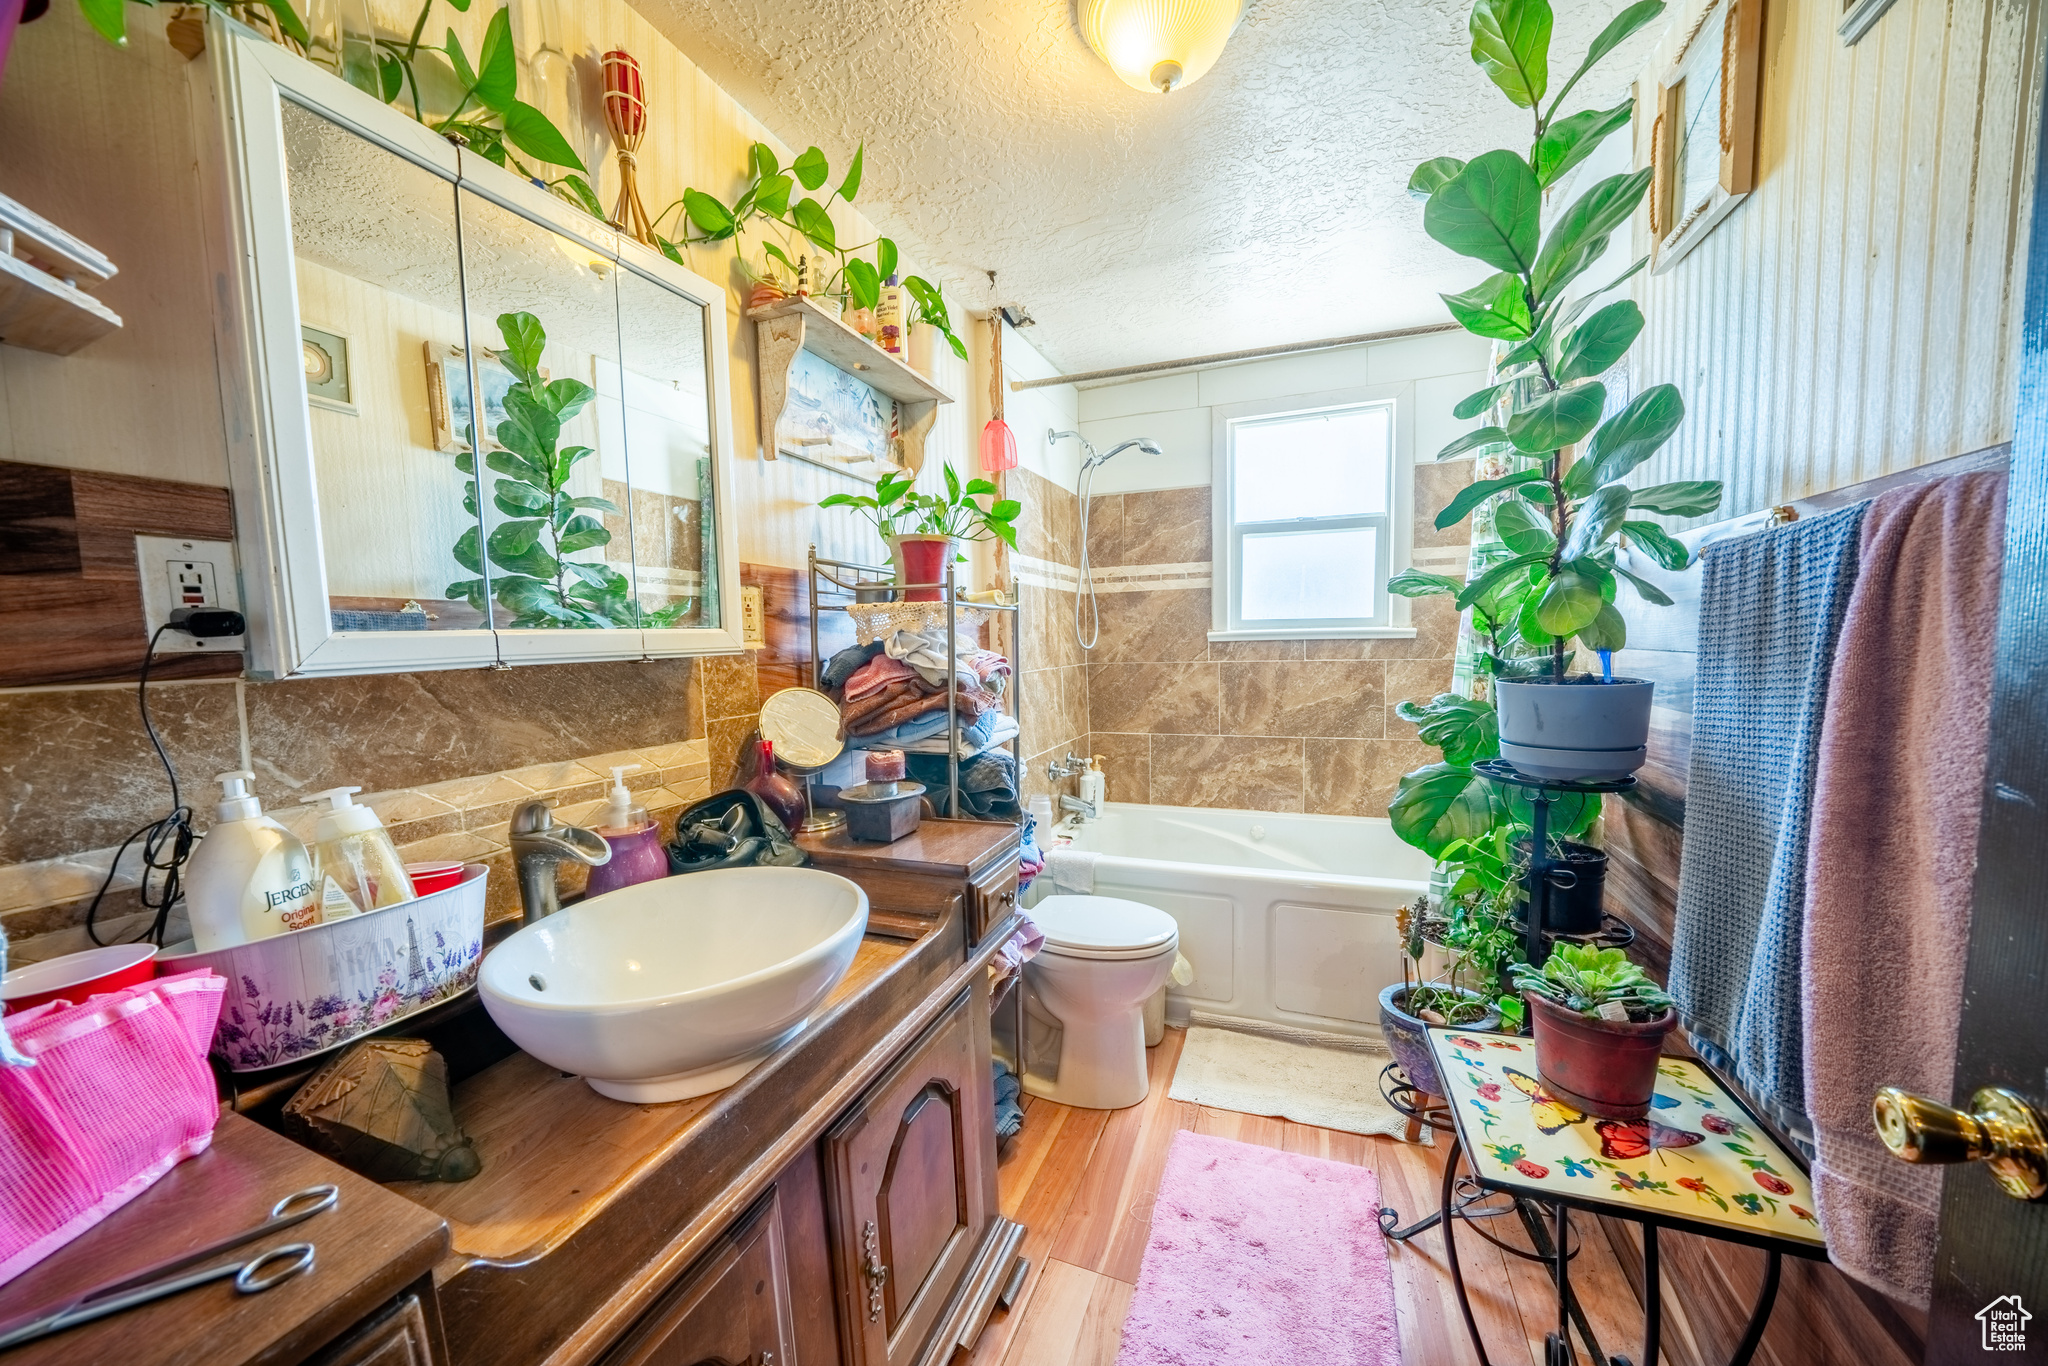 Full bathroom with hardwood / wood-style flooring, vanity, tiled shower / bath combo, a textured ceiling, and toilet